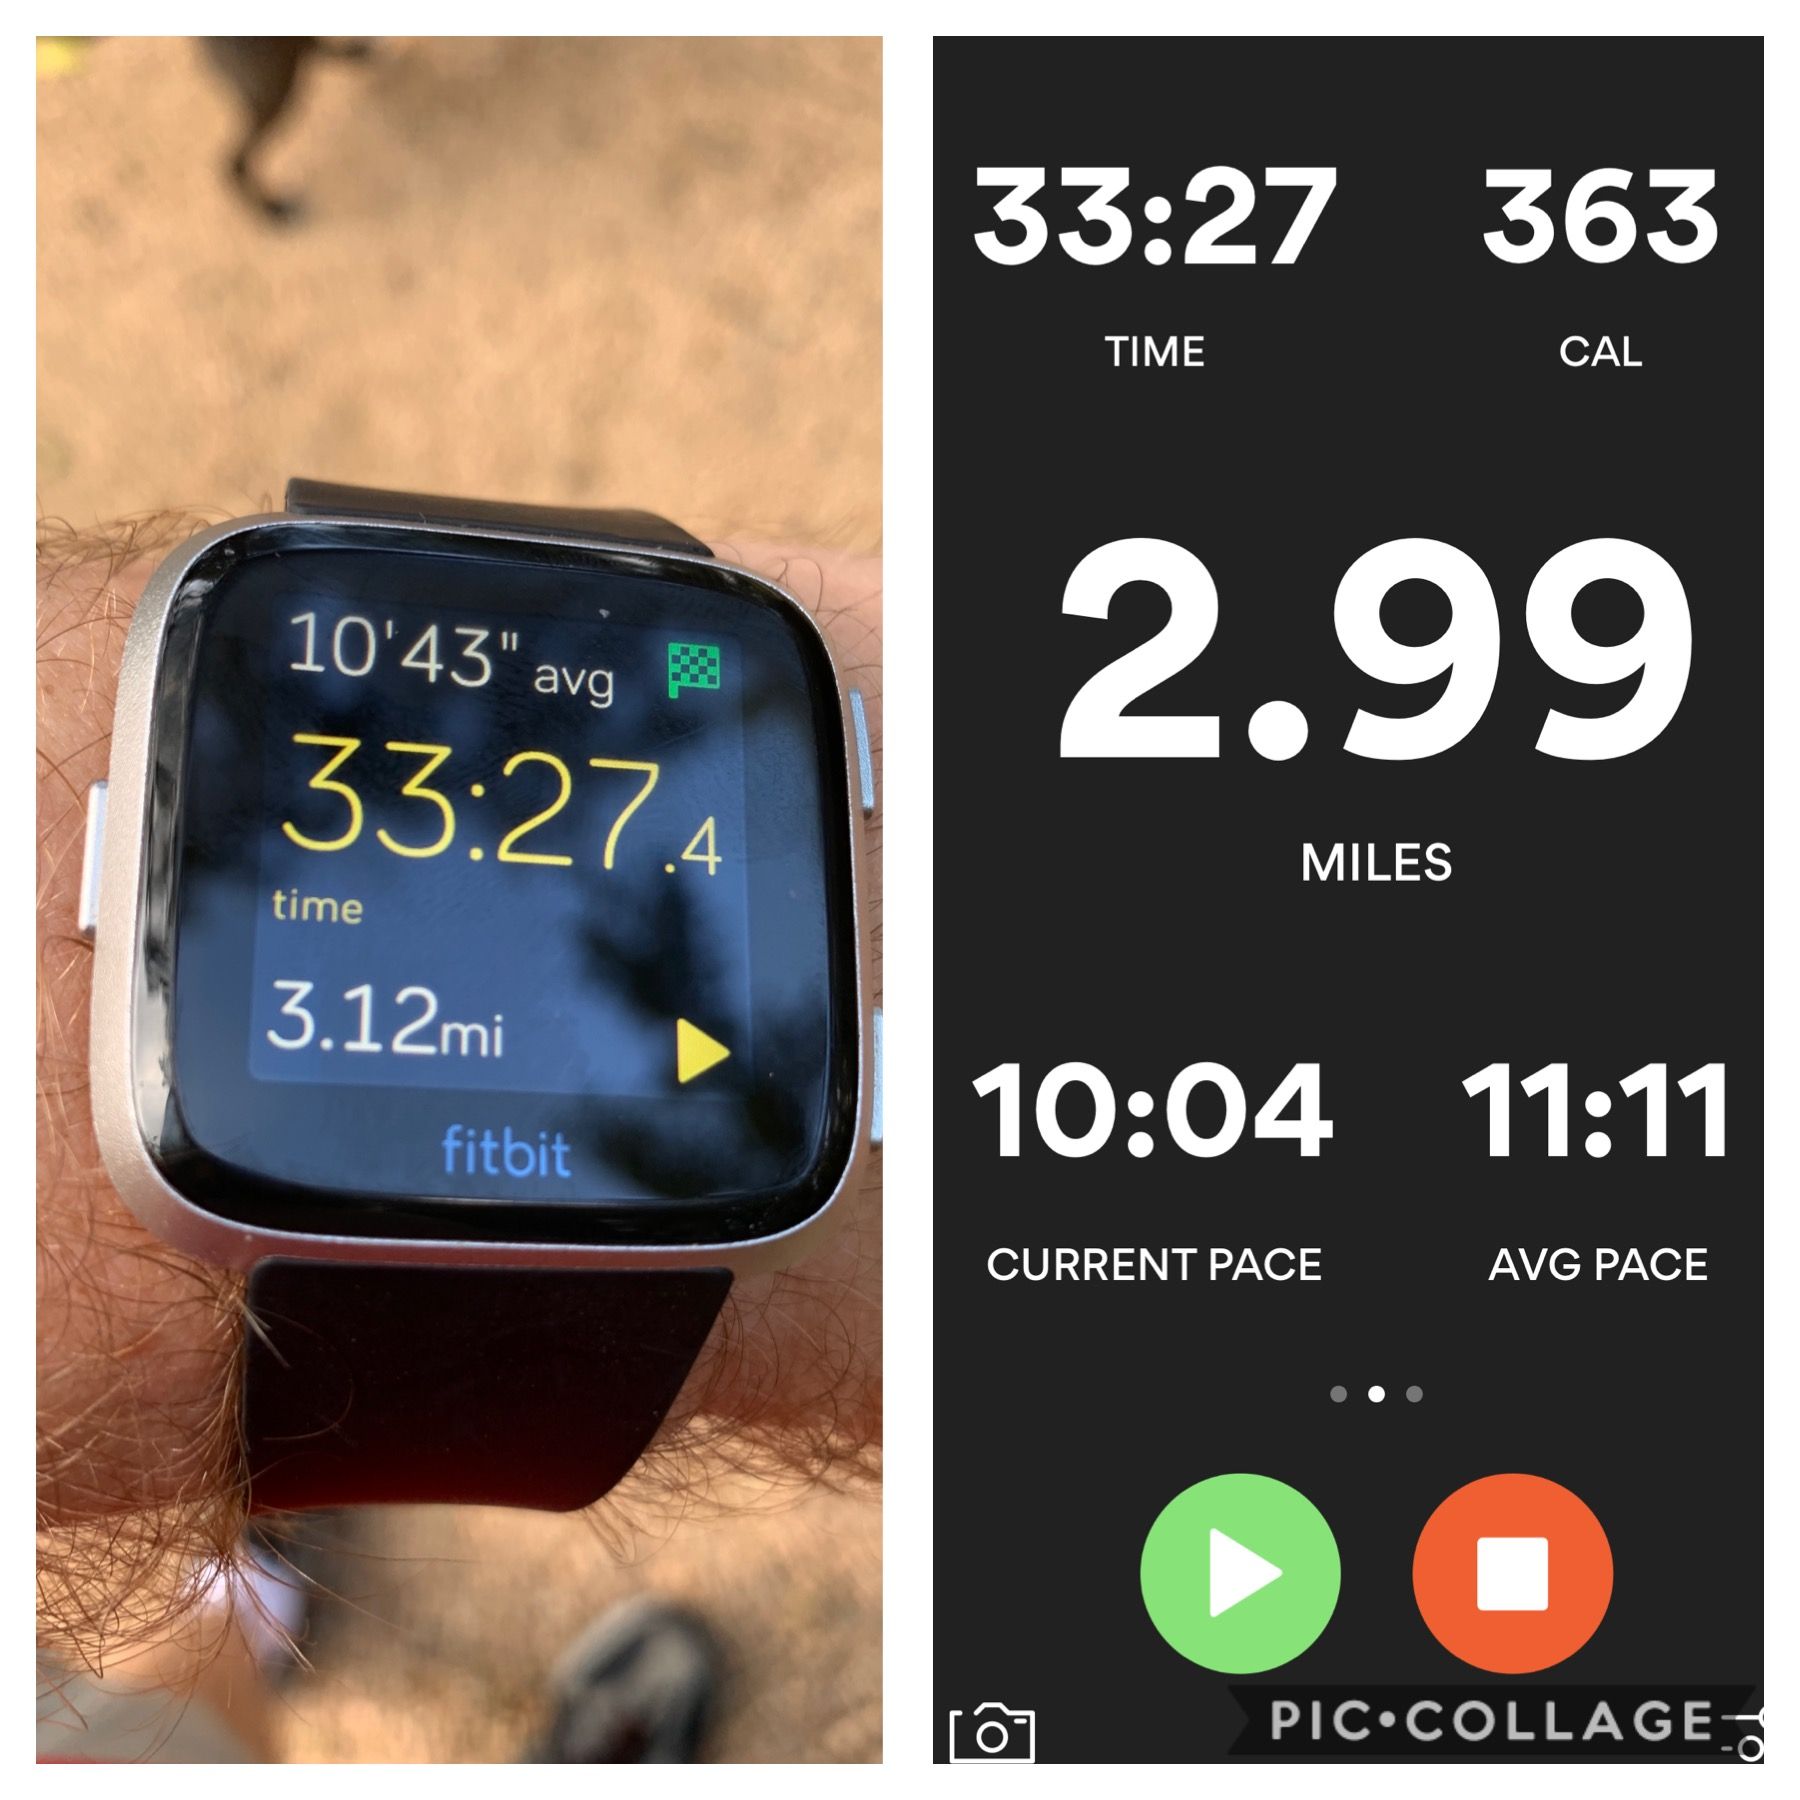 distance tracking way off? - Fitbit 